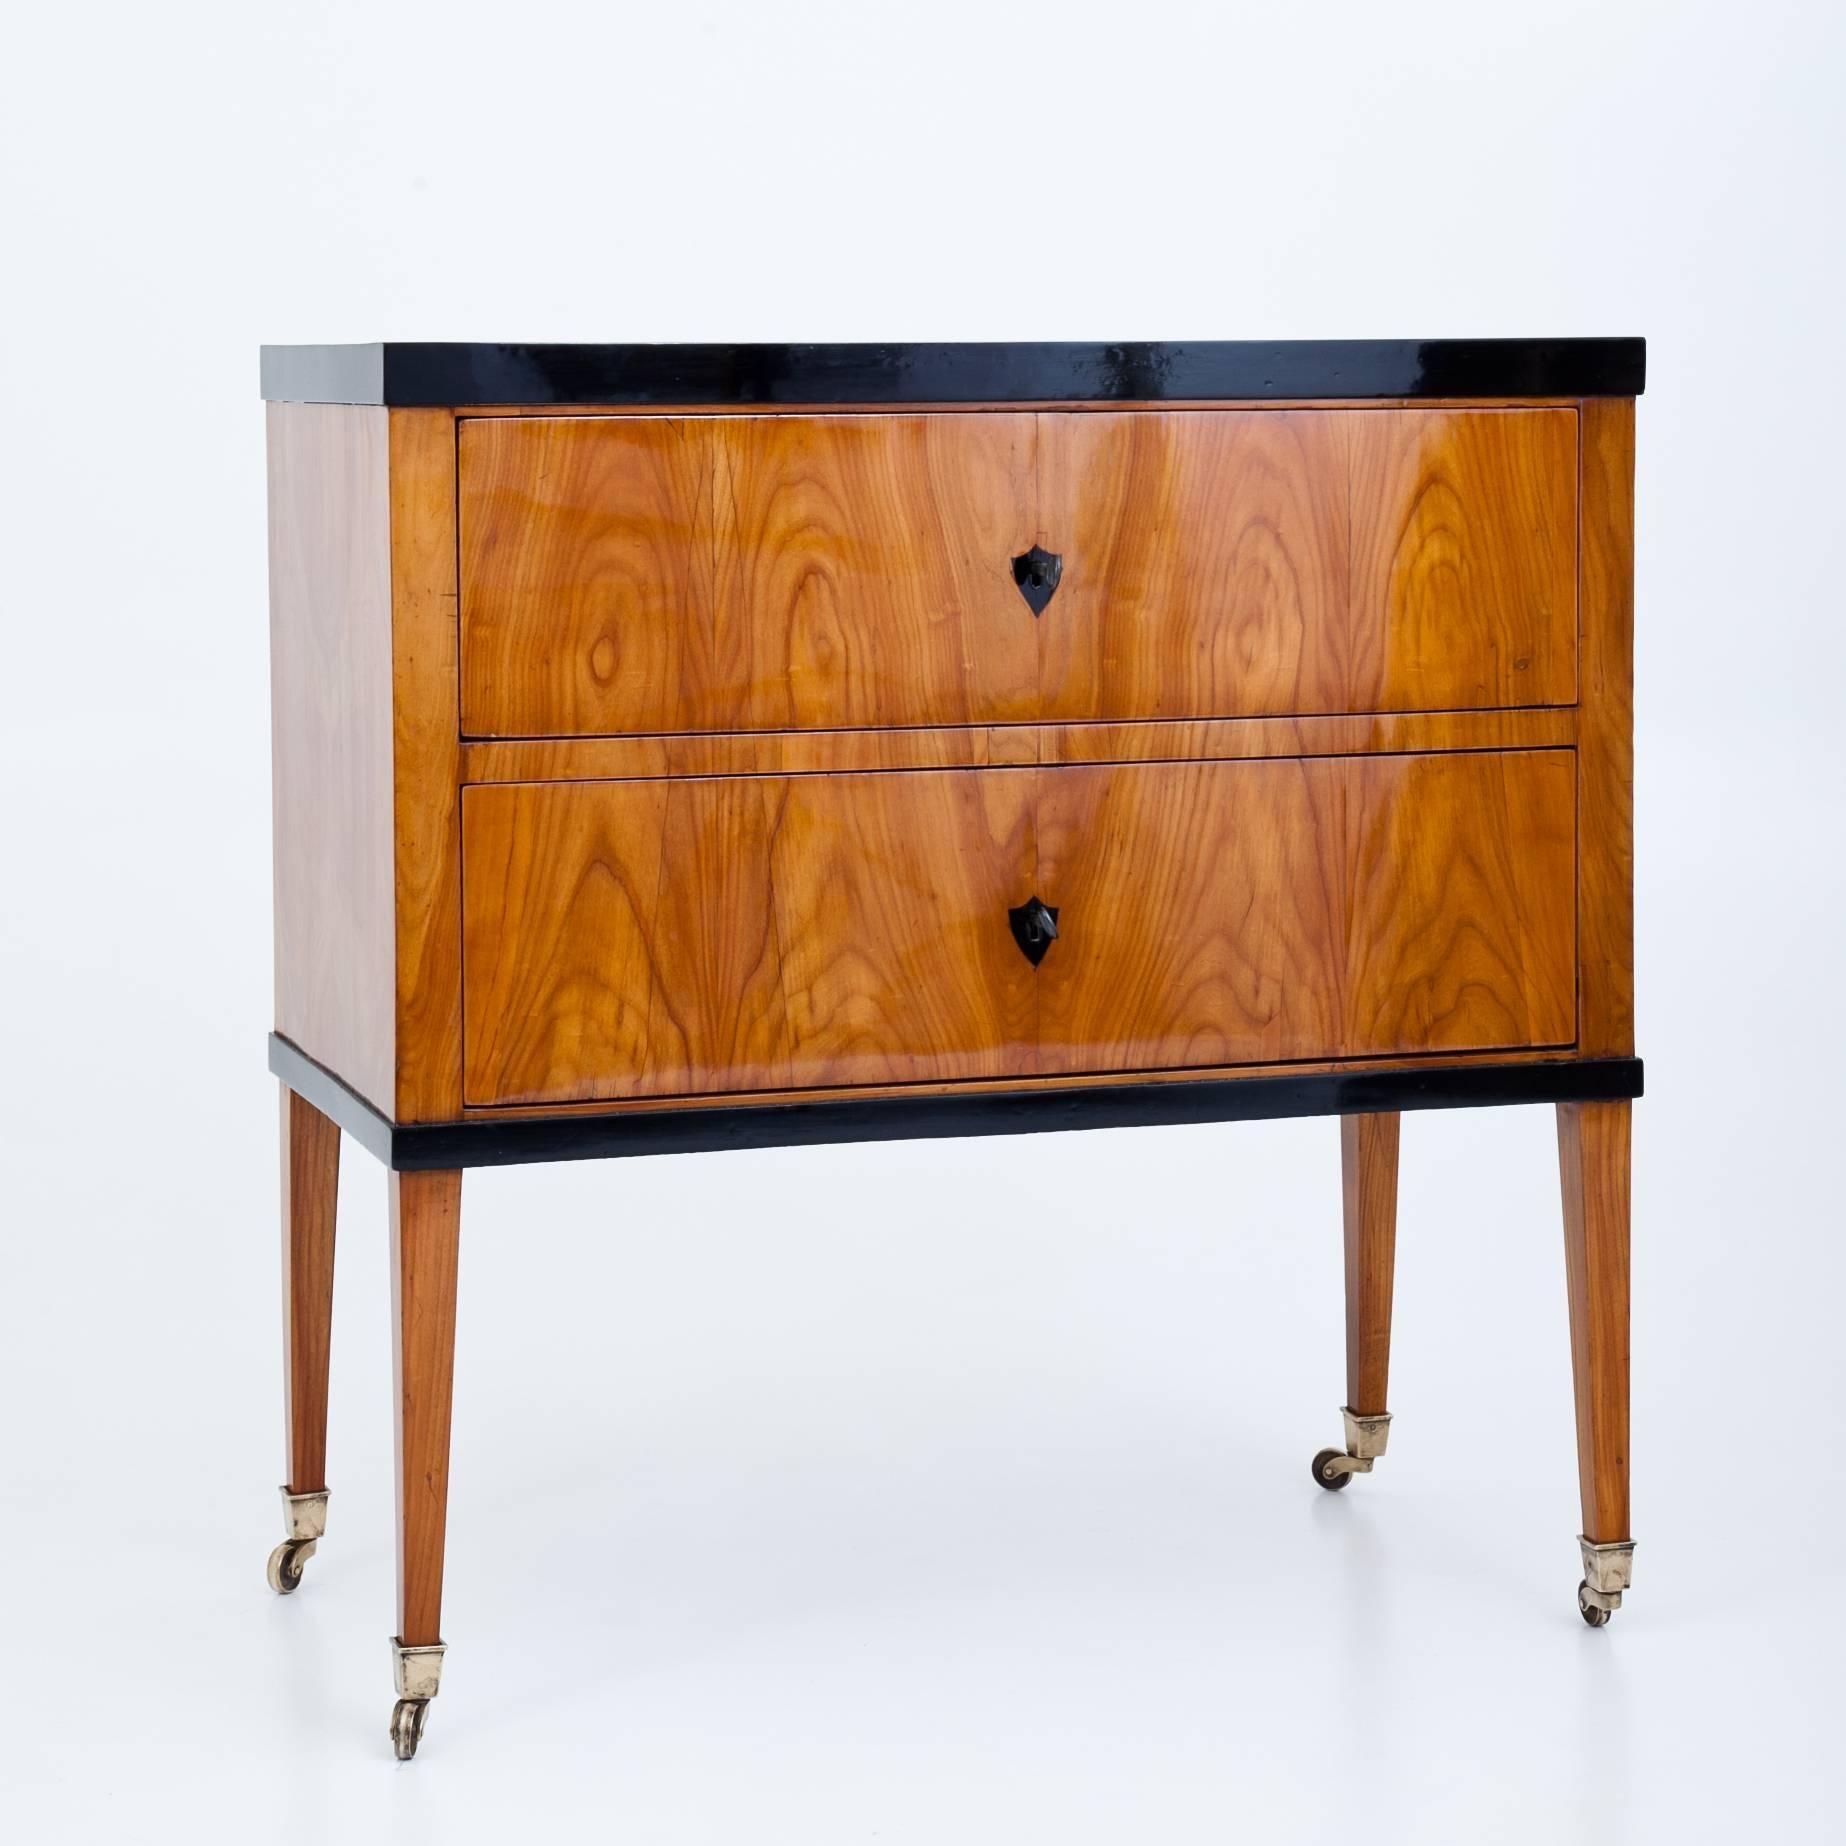 Two-drawered Biedermeier chest of drawers on long tapered legs with brass sabots on wheels. The edges and escutcheons are ebonized.